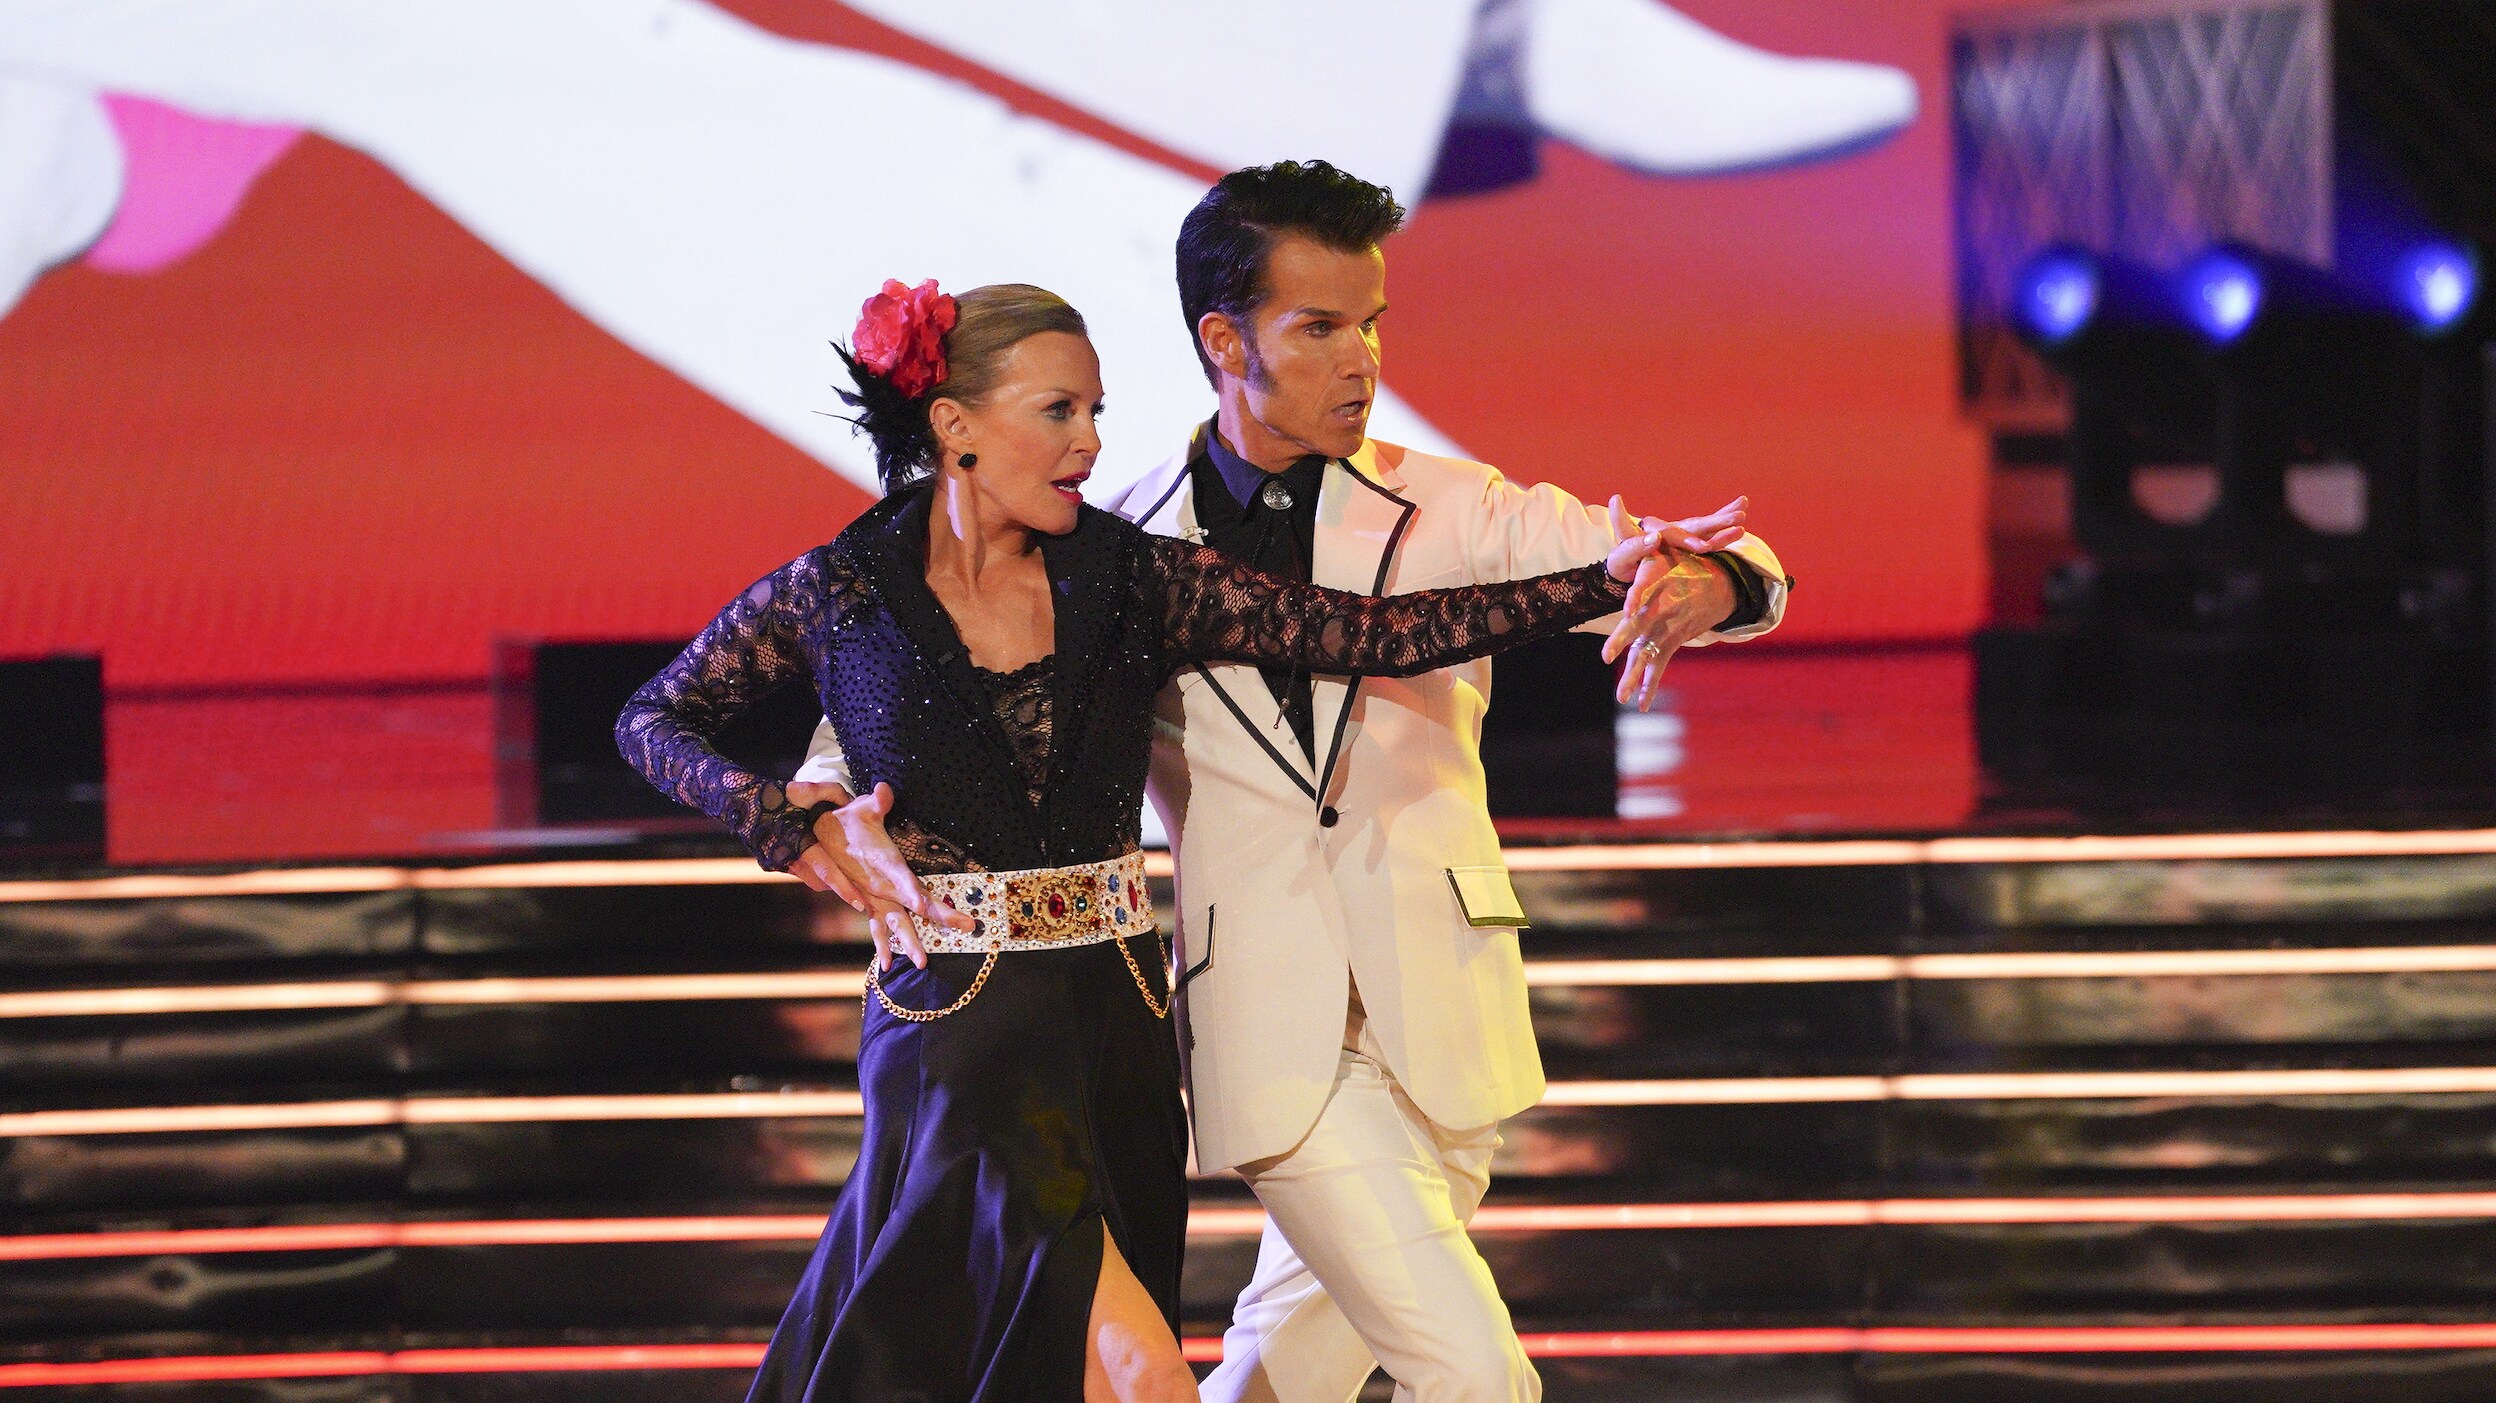 DANCING WITH THE STARS - “Elvis Night” –  The 15 remaining couples “Can’t Help Falling in Love” with Elvis this week as they take on all-new dance styles to music by The King of Rock ‘n’ Roll. Week two of the mirorrball competition will stream live MONDAY, SEPT. 26 (8:00pm ET / 5:00pm PT), on Disney+. (ABC/Christopher Willard) CHERYL LADD, LOUIS VAN AMSTEL